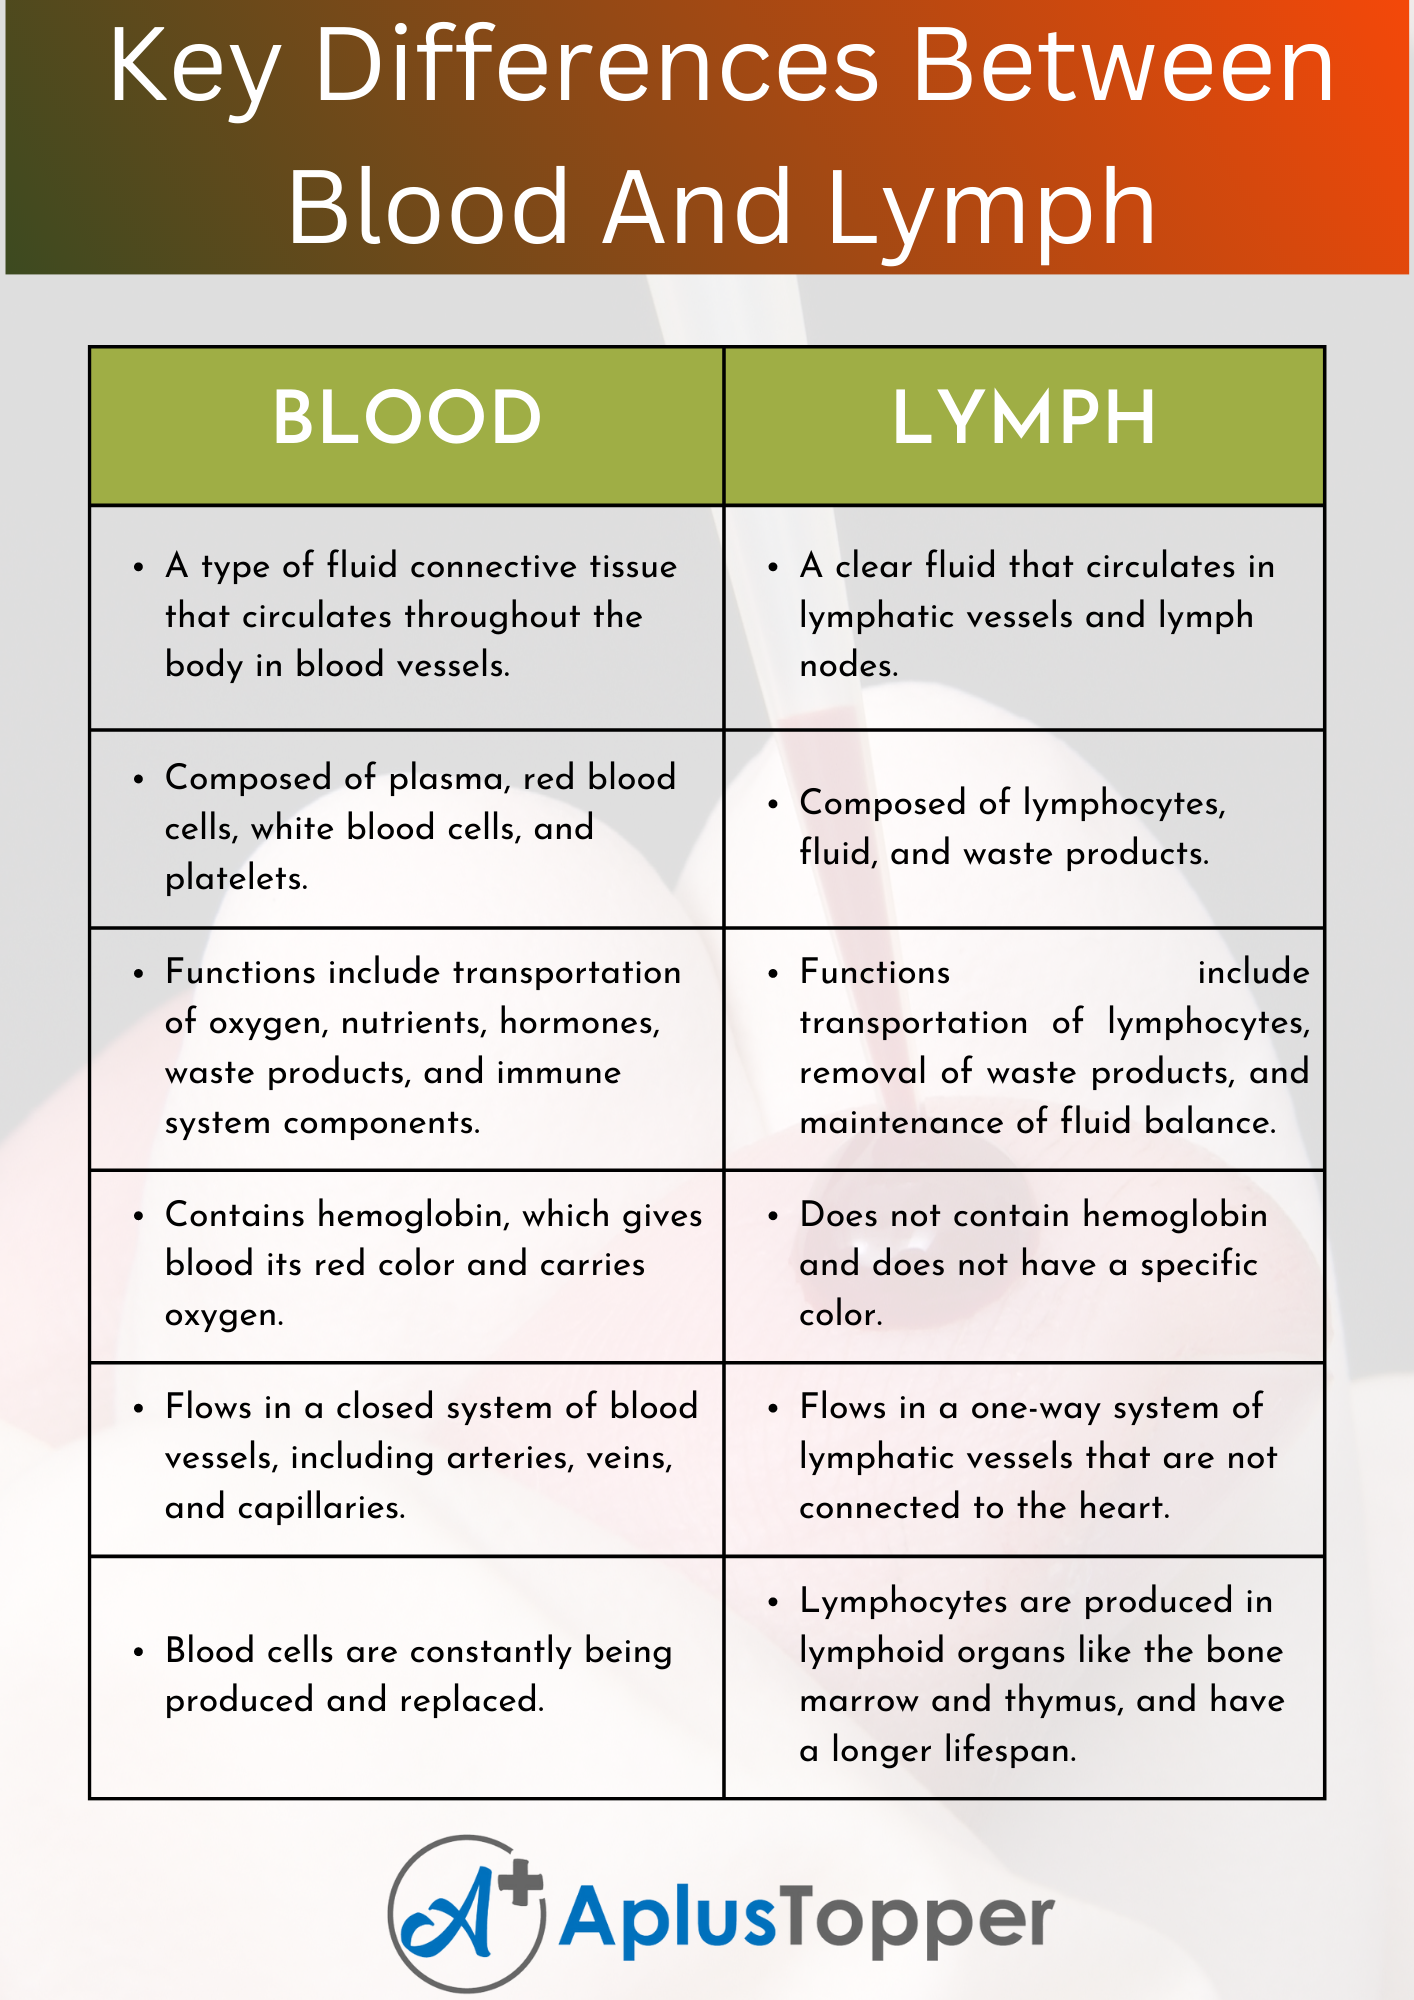 Difference Between Blood And Lymph Understanding The Key Differences